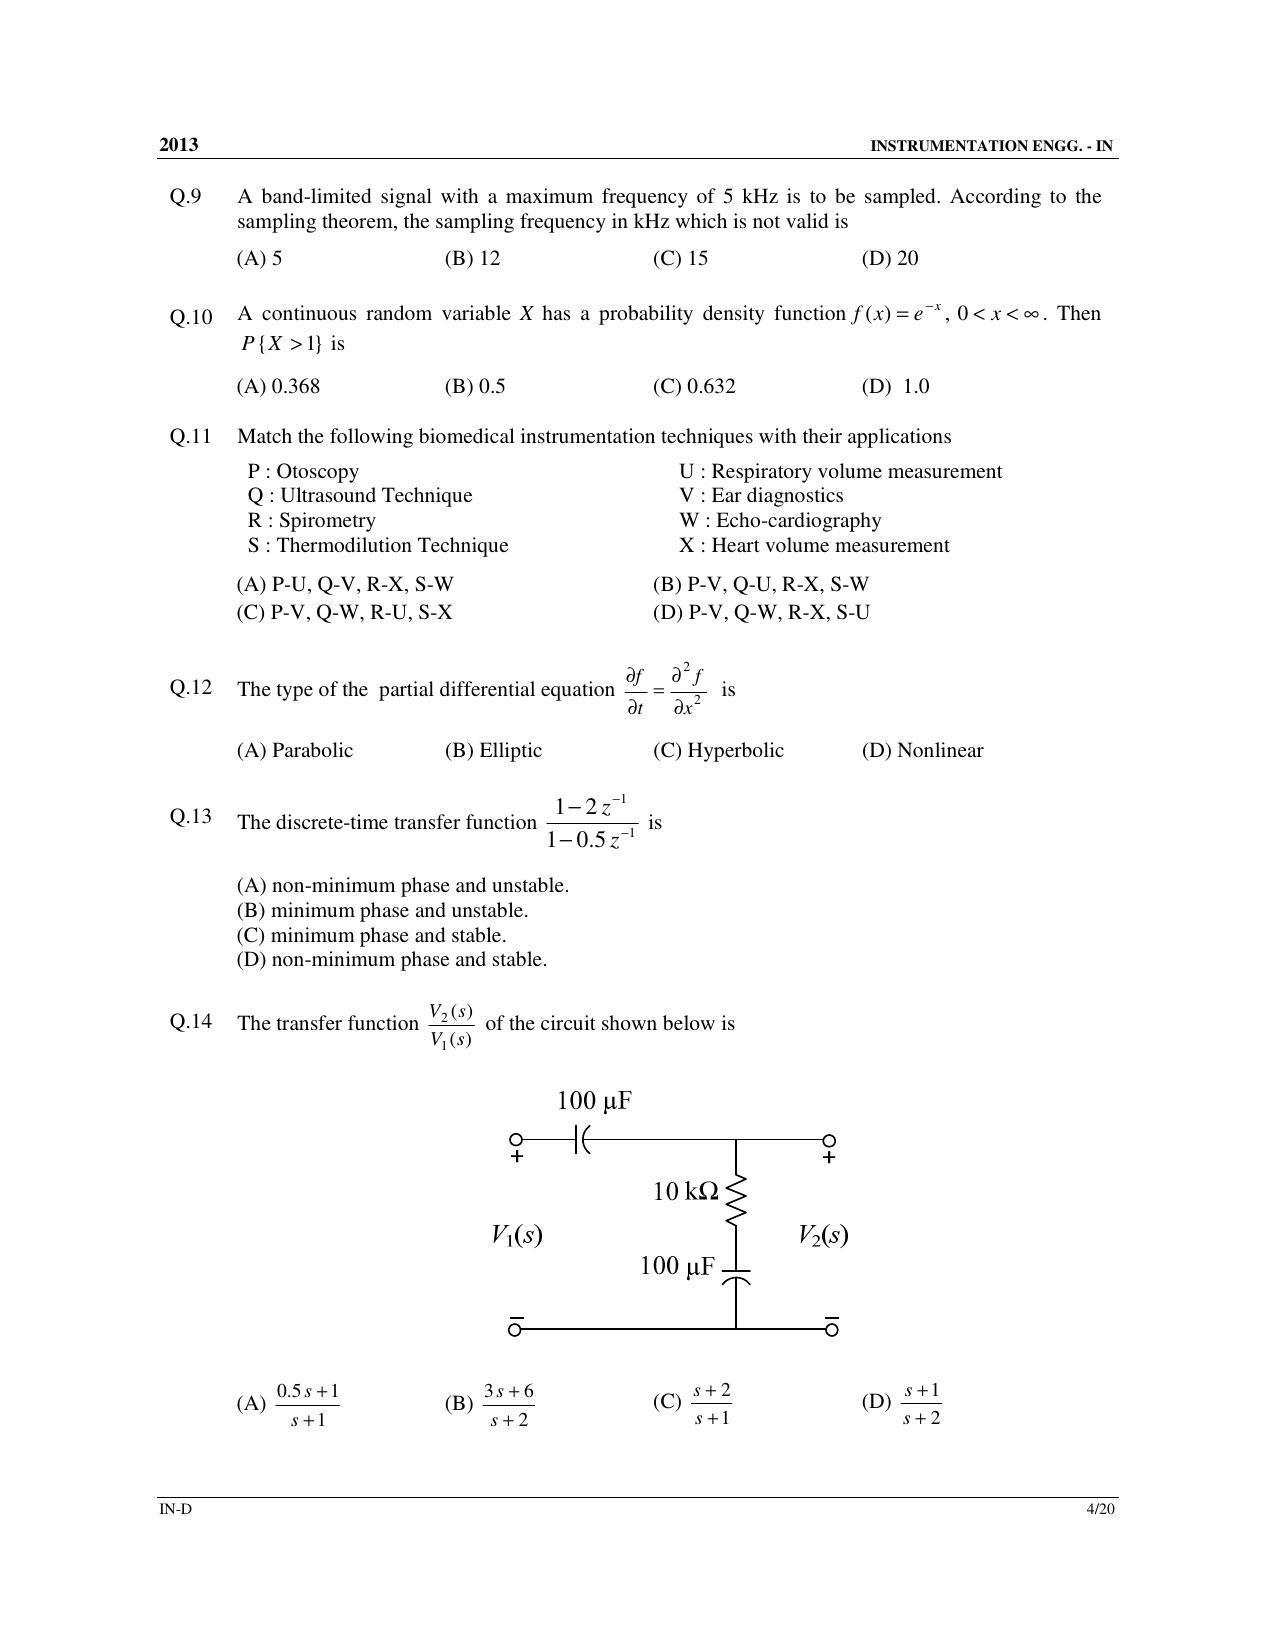 GATE 2013 Instrumentation Engineering (IN) Question Paper with Answer Key - Page 56